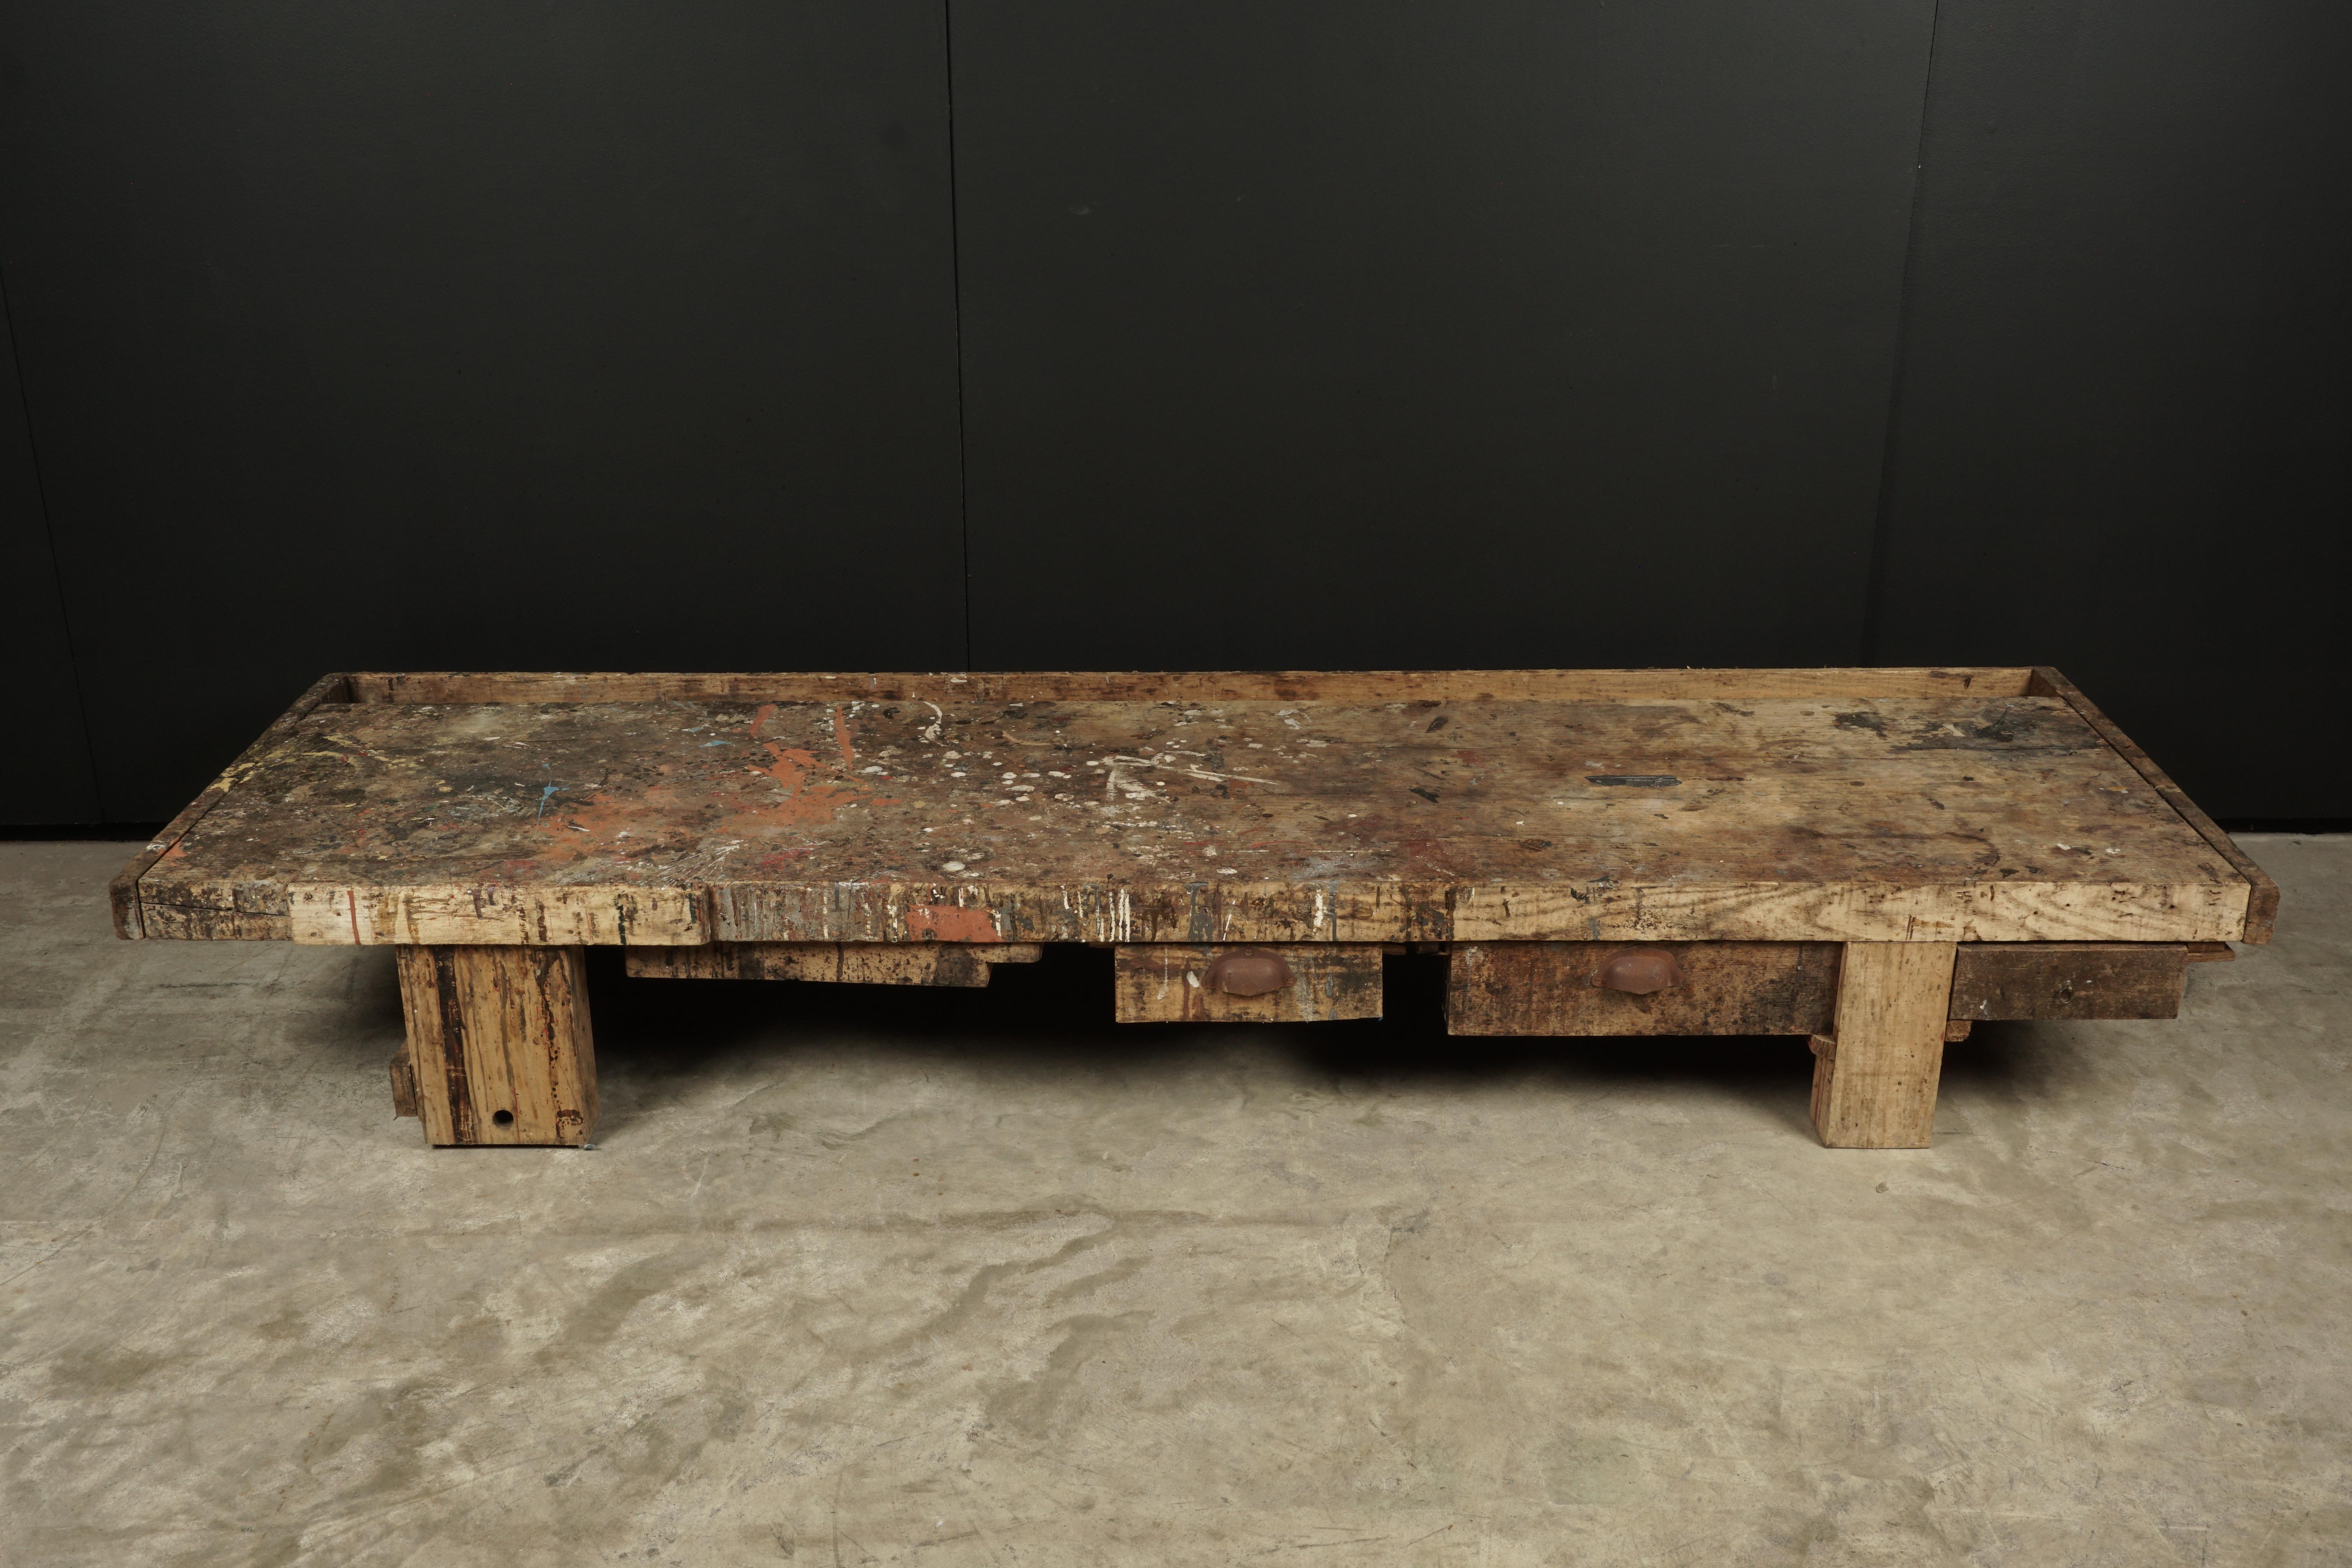 Low Primitive coffee table from France, circa 1950. Fantastic original wear and patina. Three drawers on front.